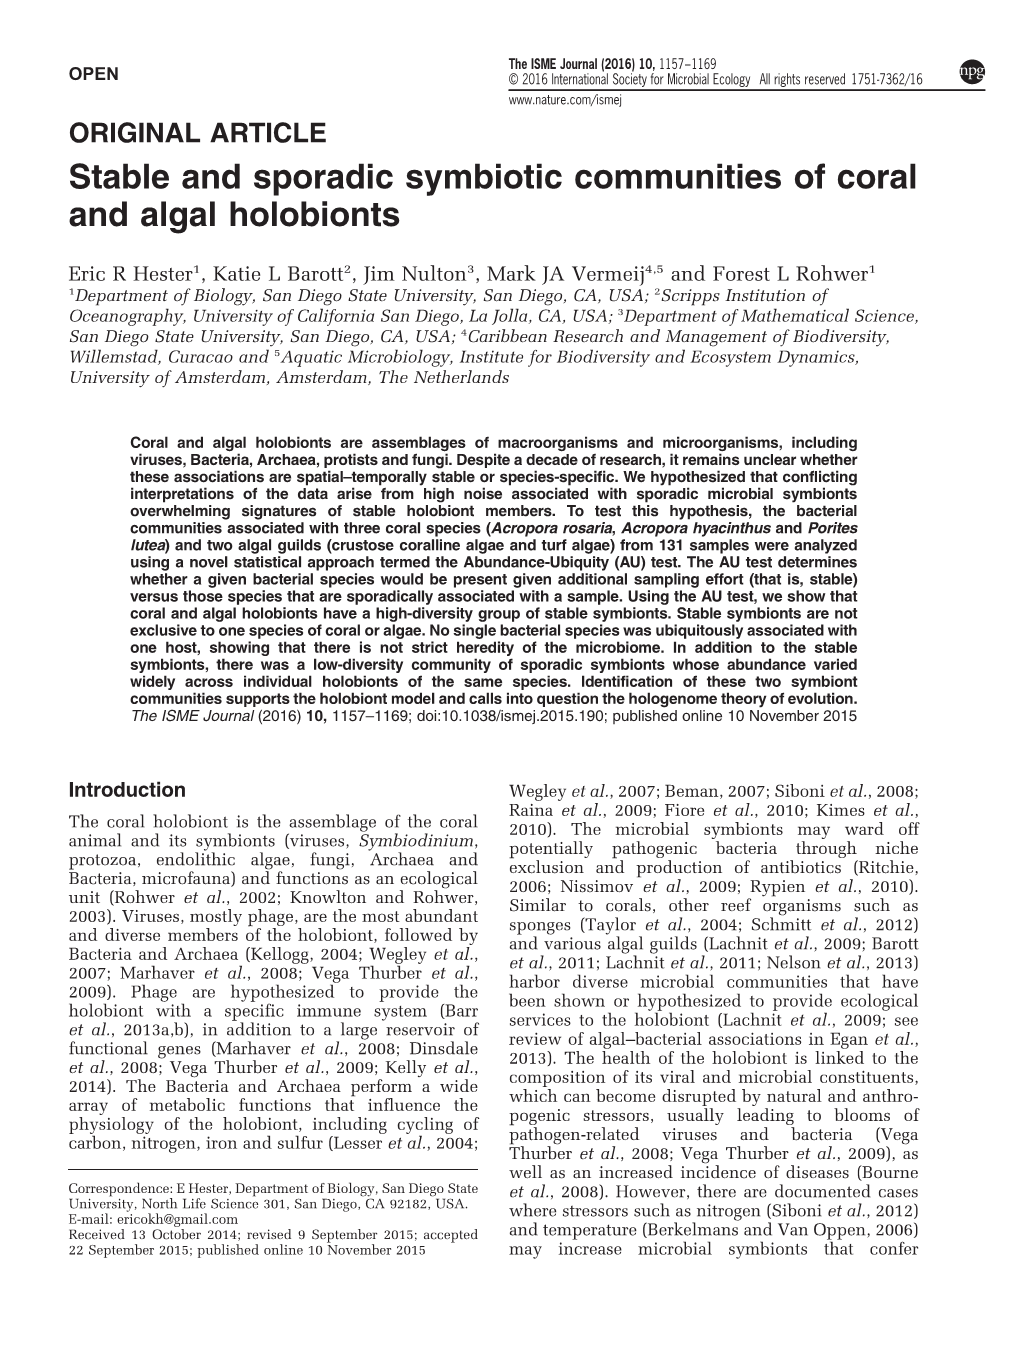 Stable and Sporadic Symbiotic Communities of Coral and Algal Holobionts